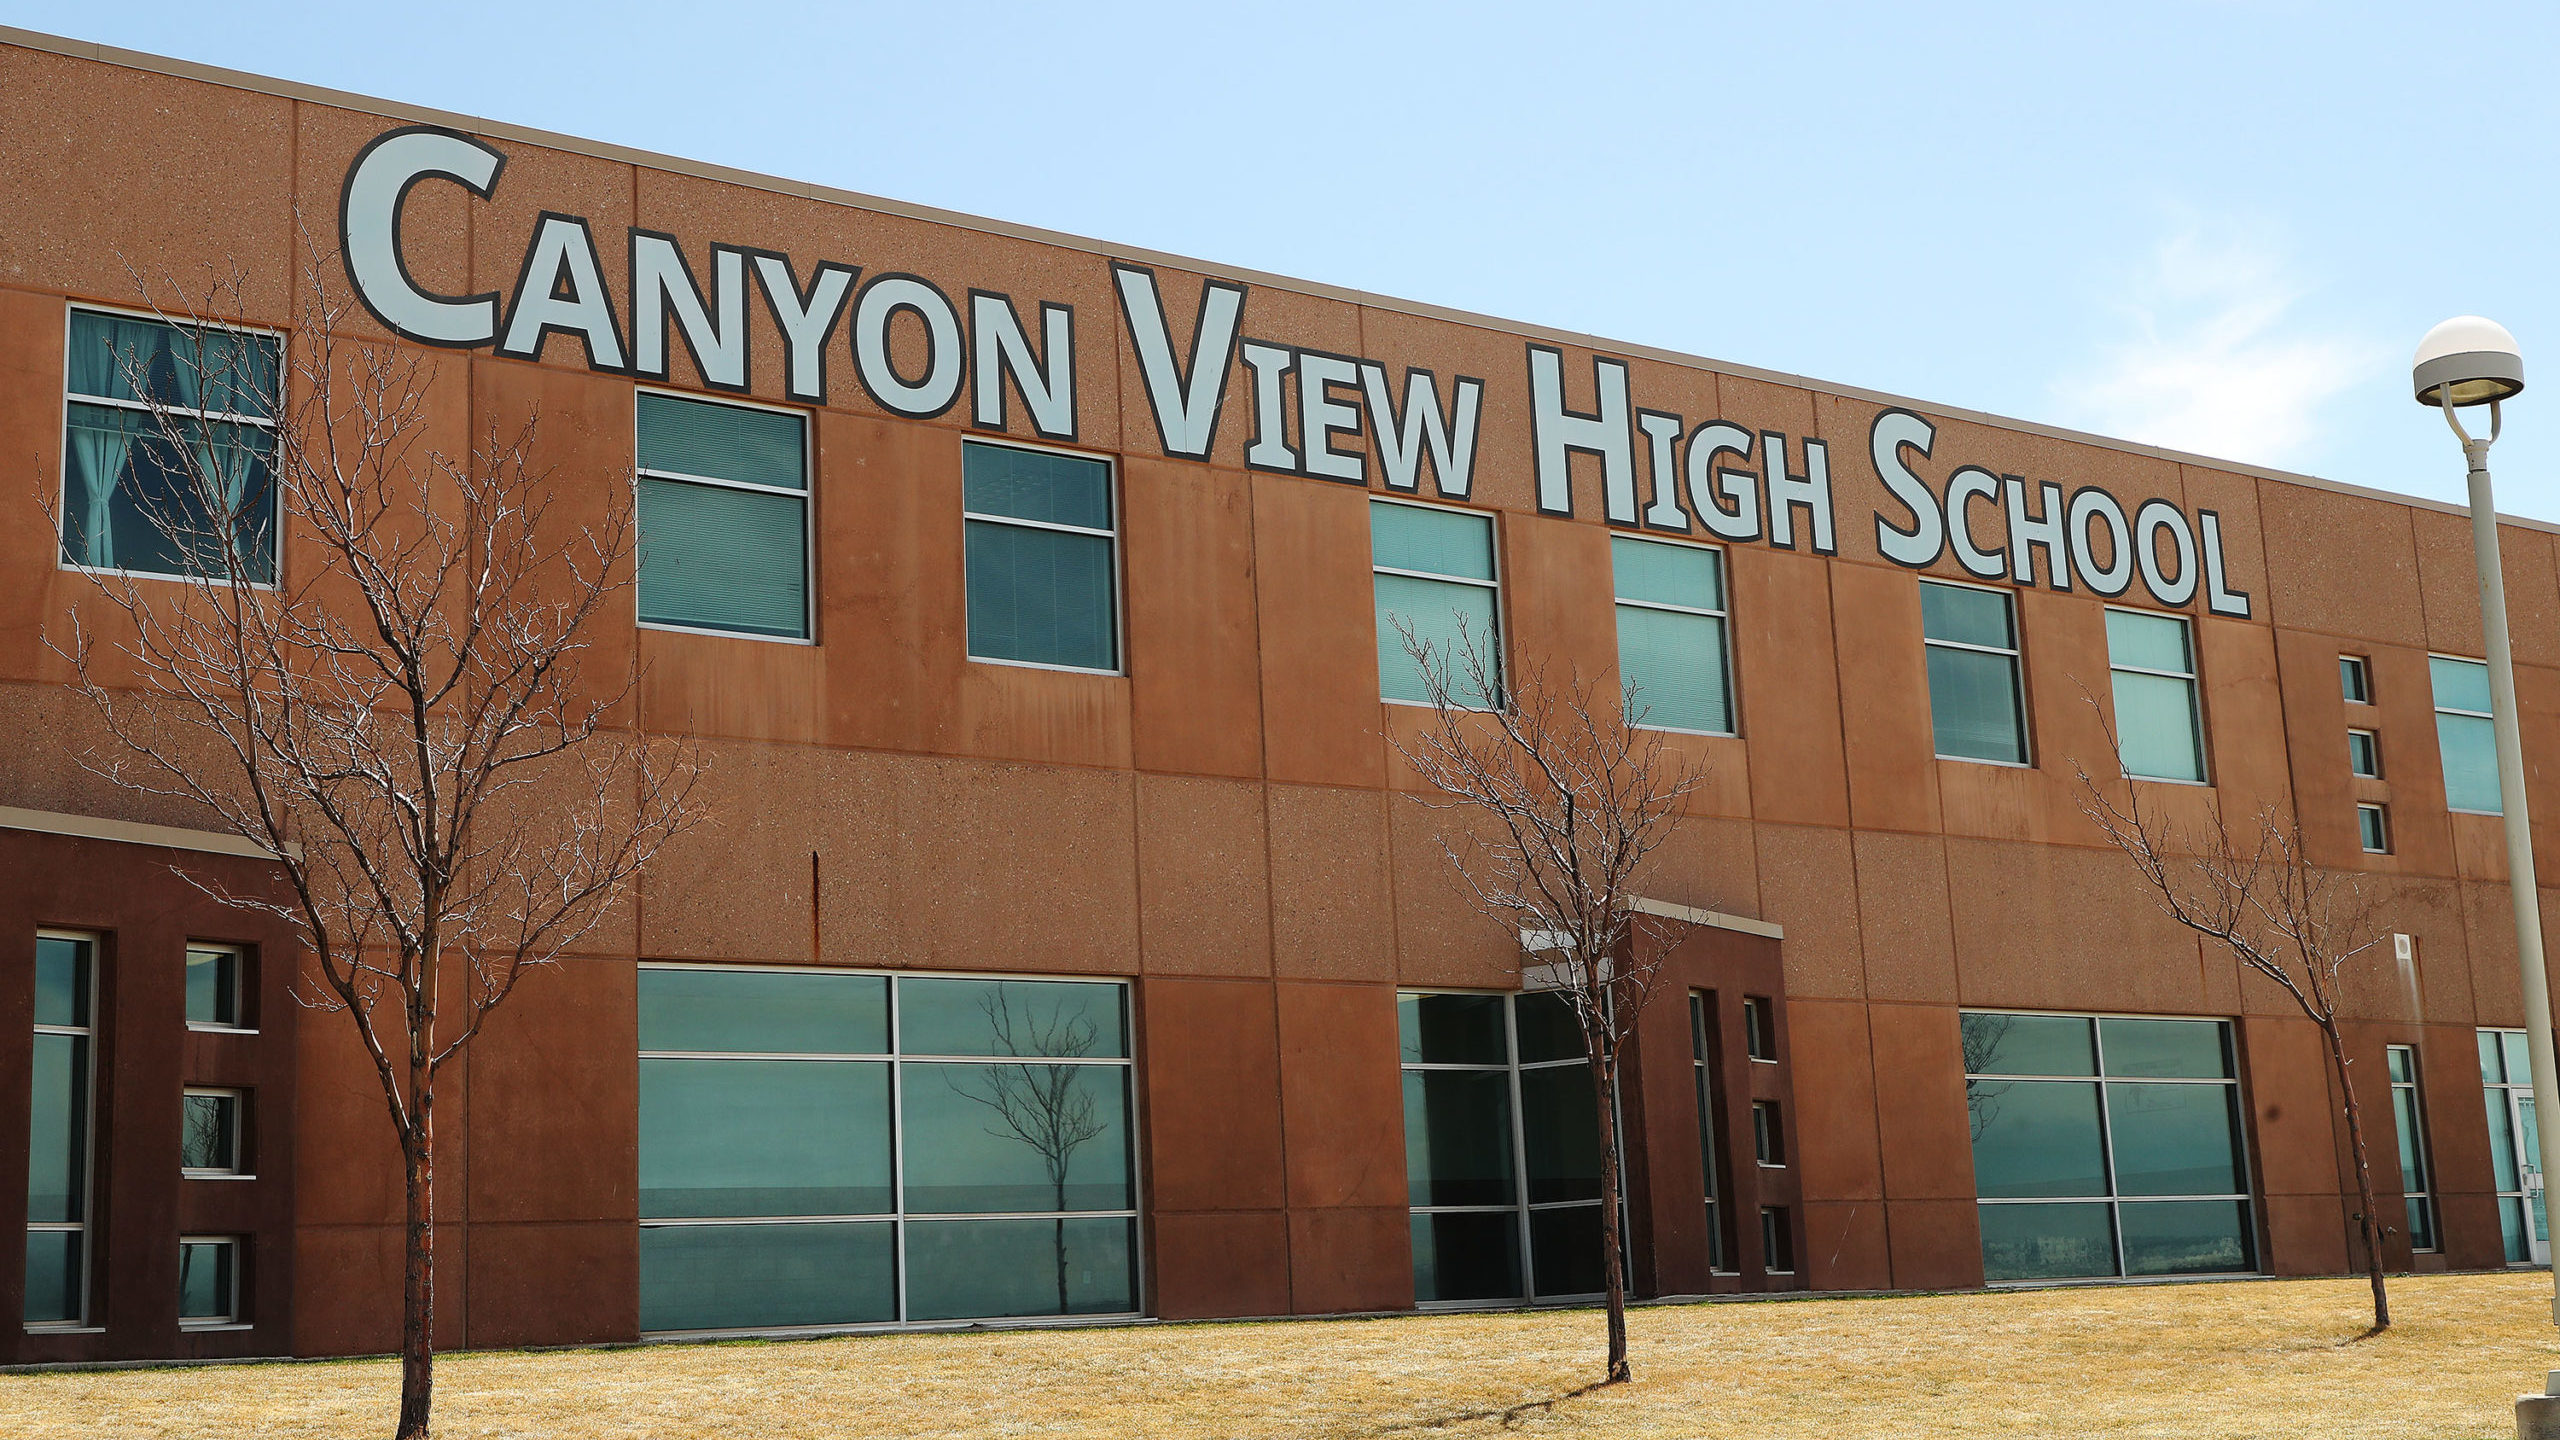 canyon view high school is pictured...